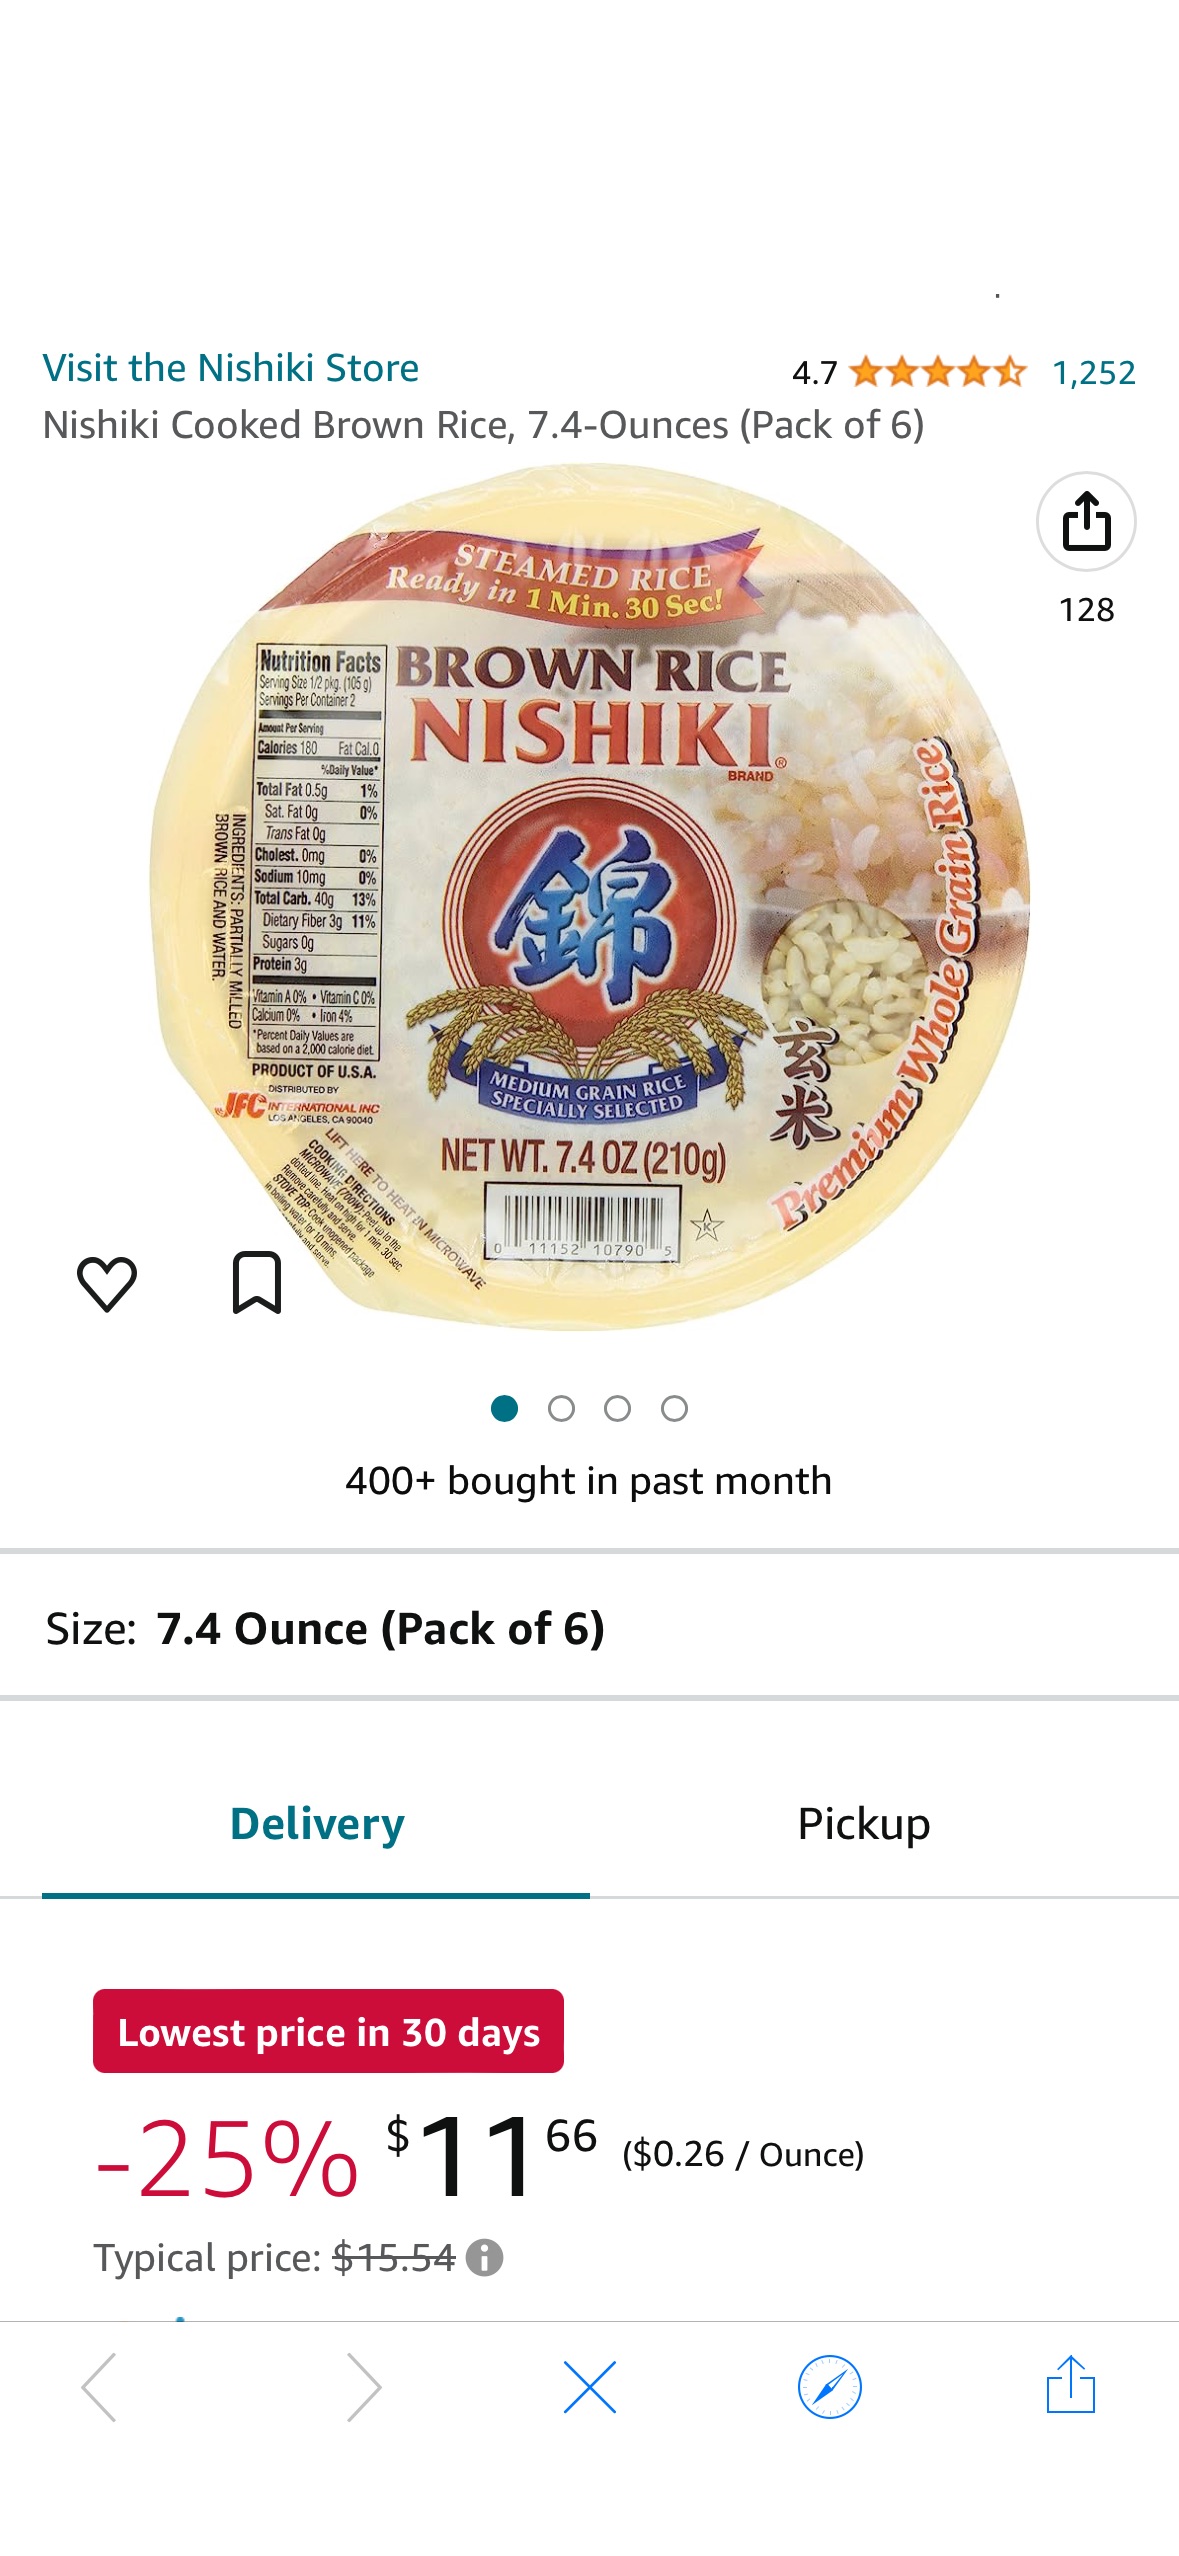 Amazon.com : Nishiki Cooked Brown Rice, 7.4-Ounces (Pack of 6) : Brown Rice Produce : Grocery & Gourmet Food